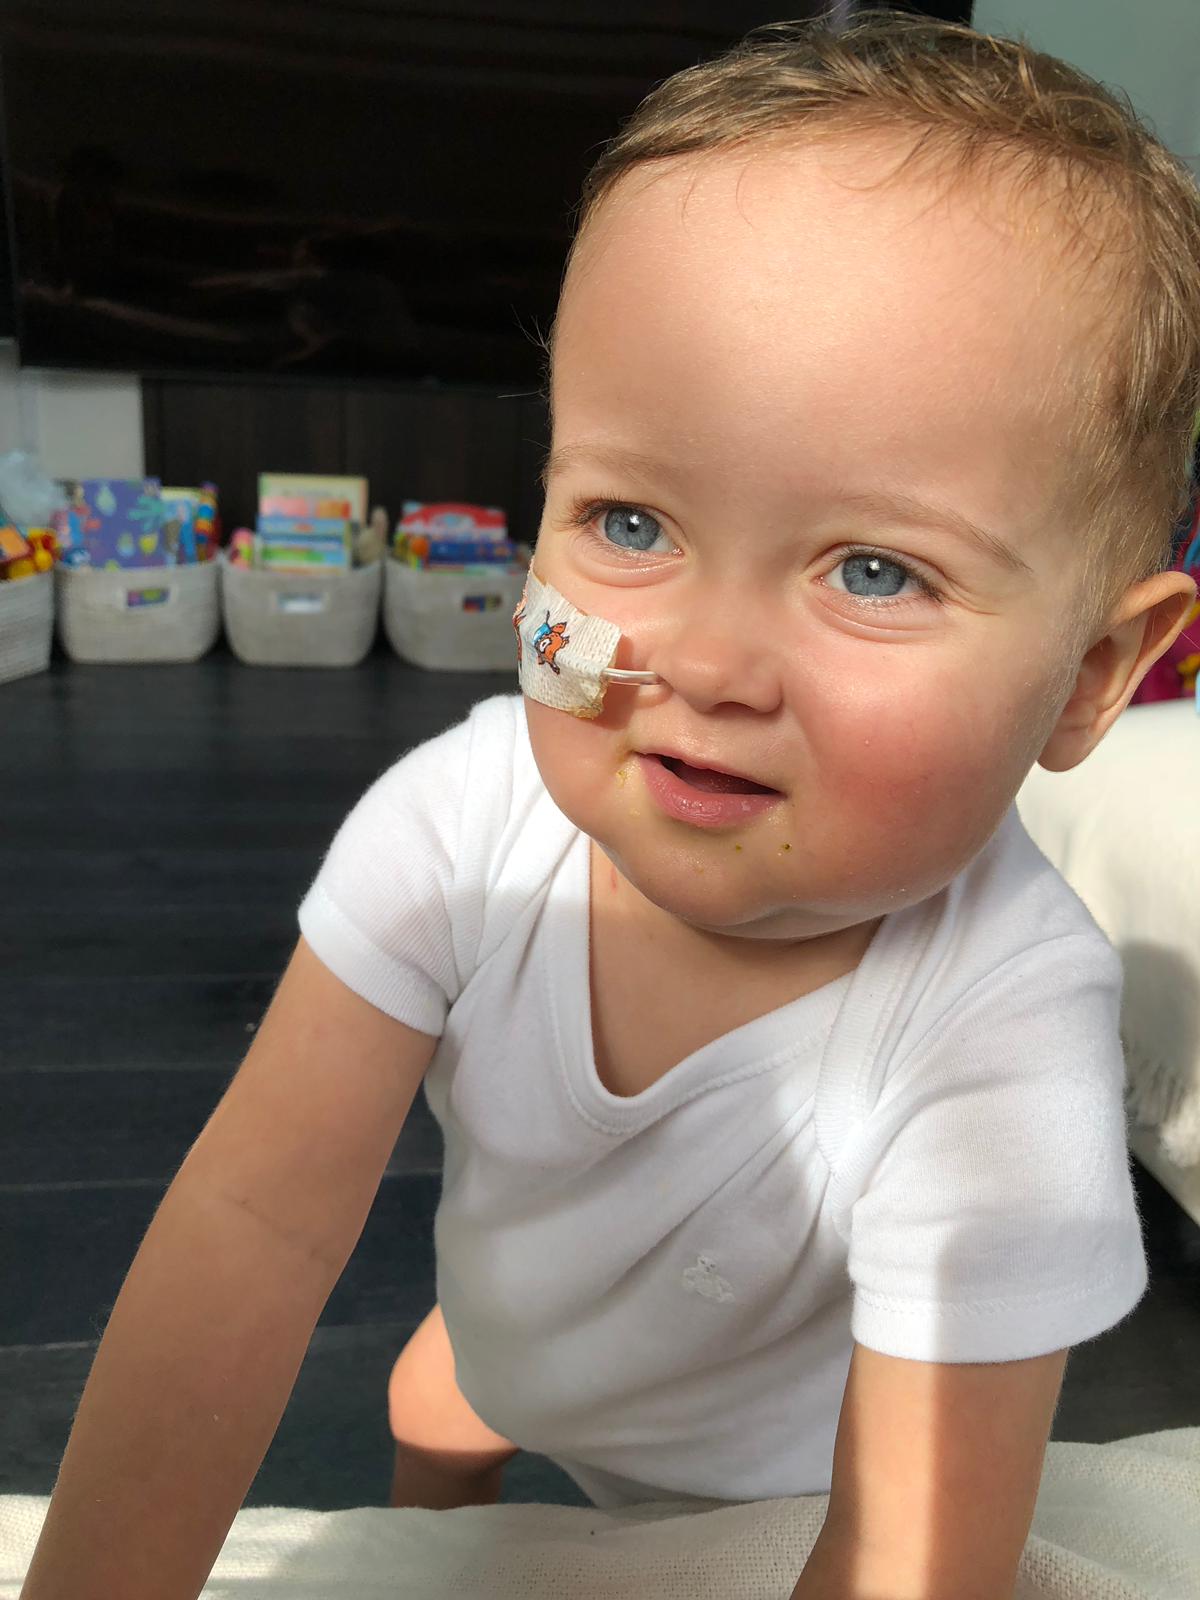 Baby Alessandro DKMS patient